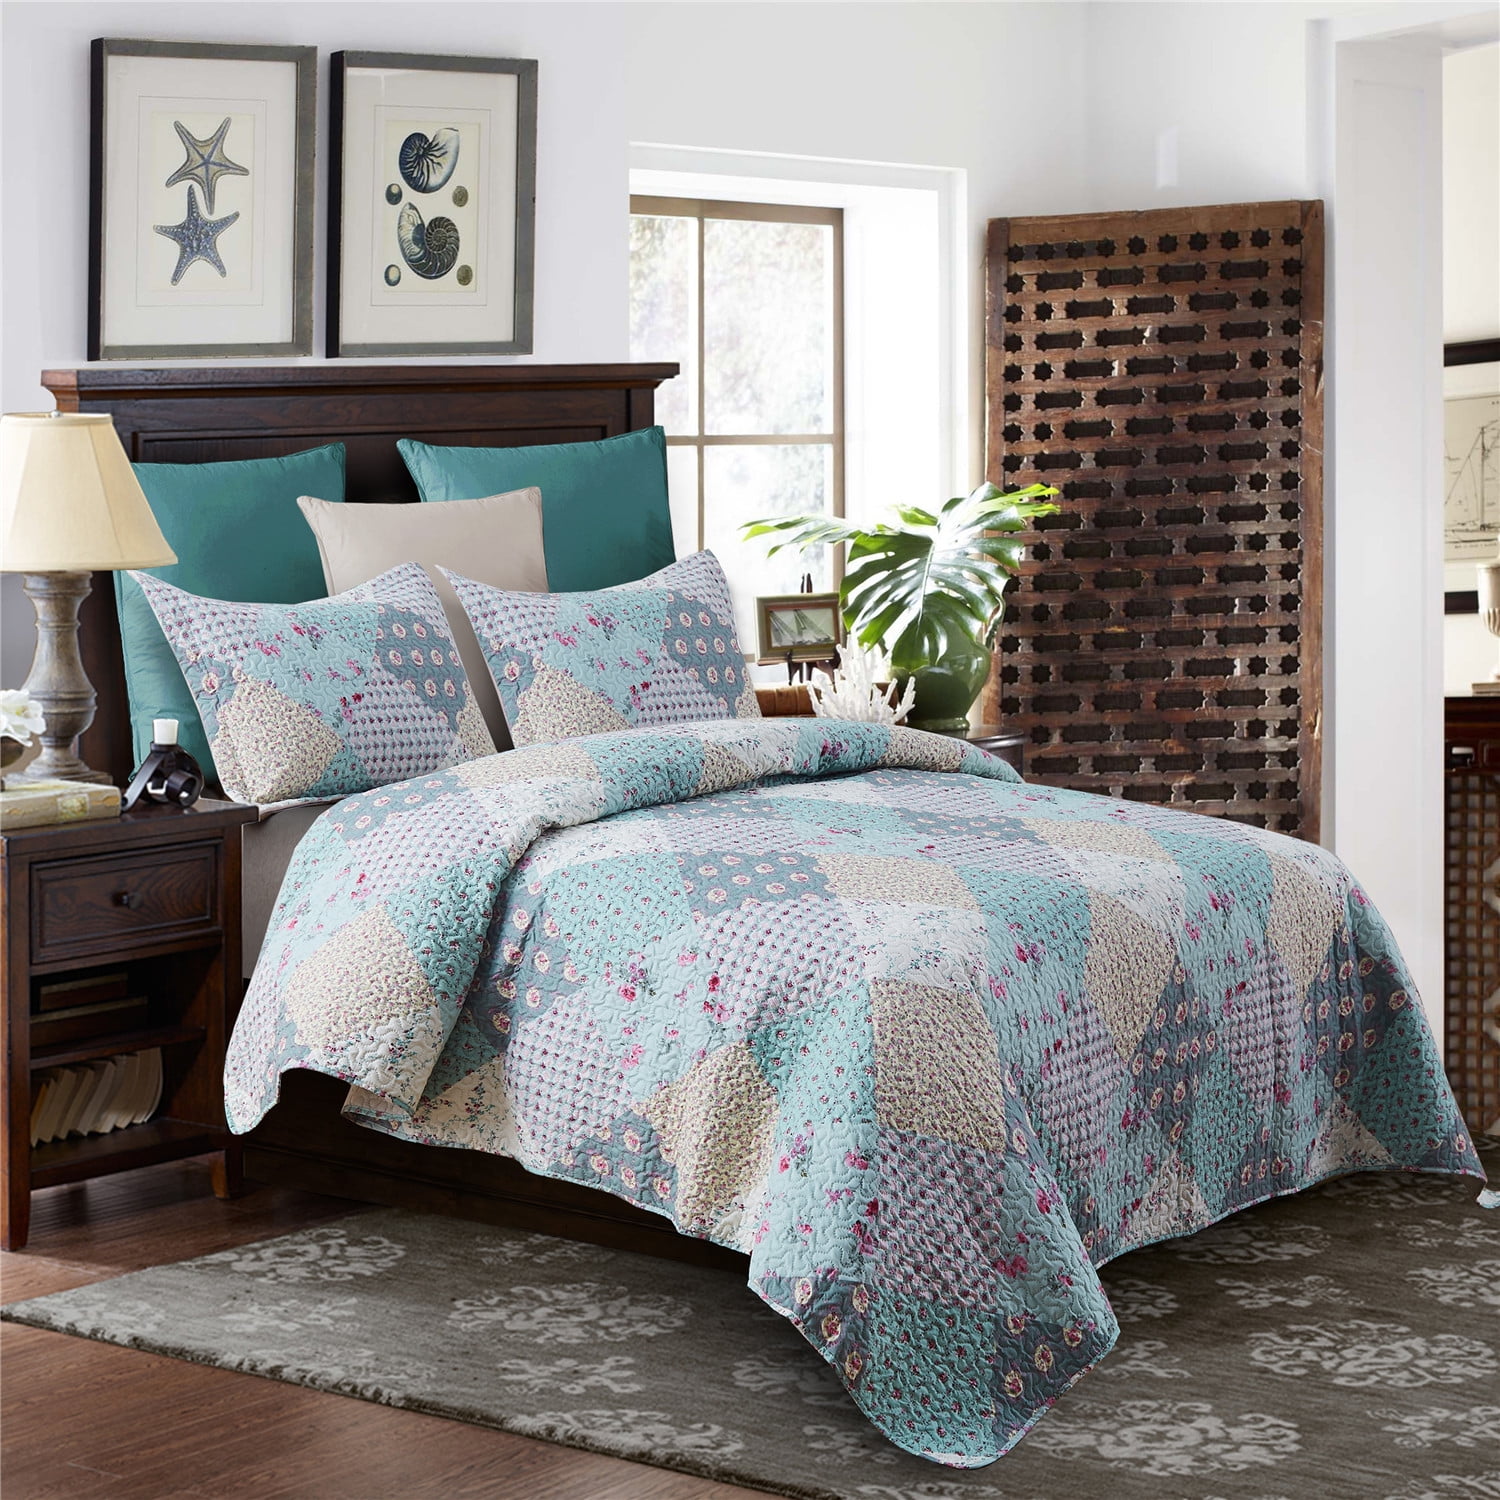 Details about   New-Cotton Single In Size Printed Quilt Kantha Blanket Floral-Bed-Cover-Blanket 